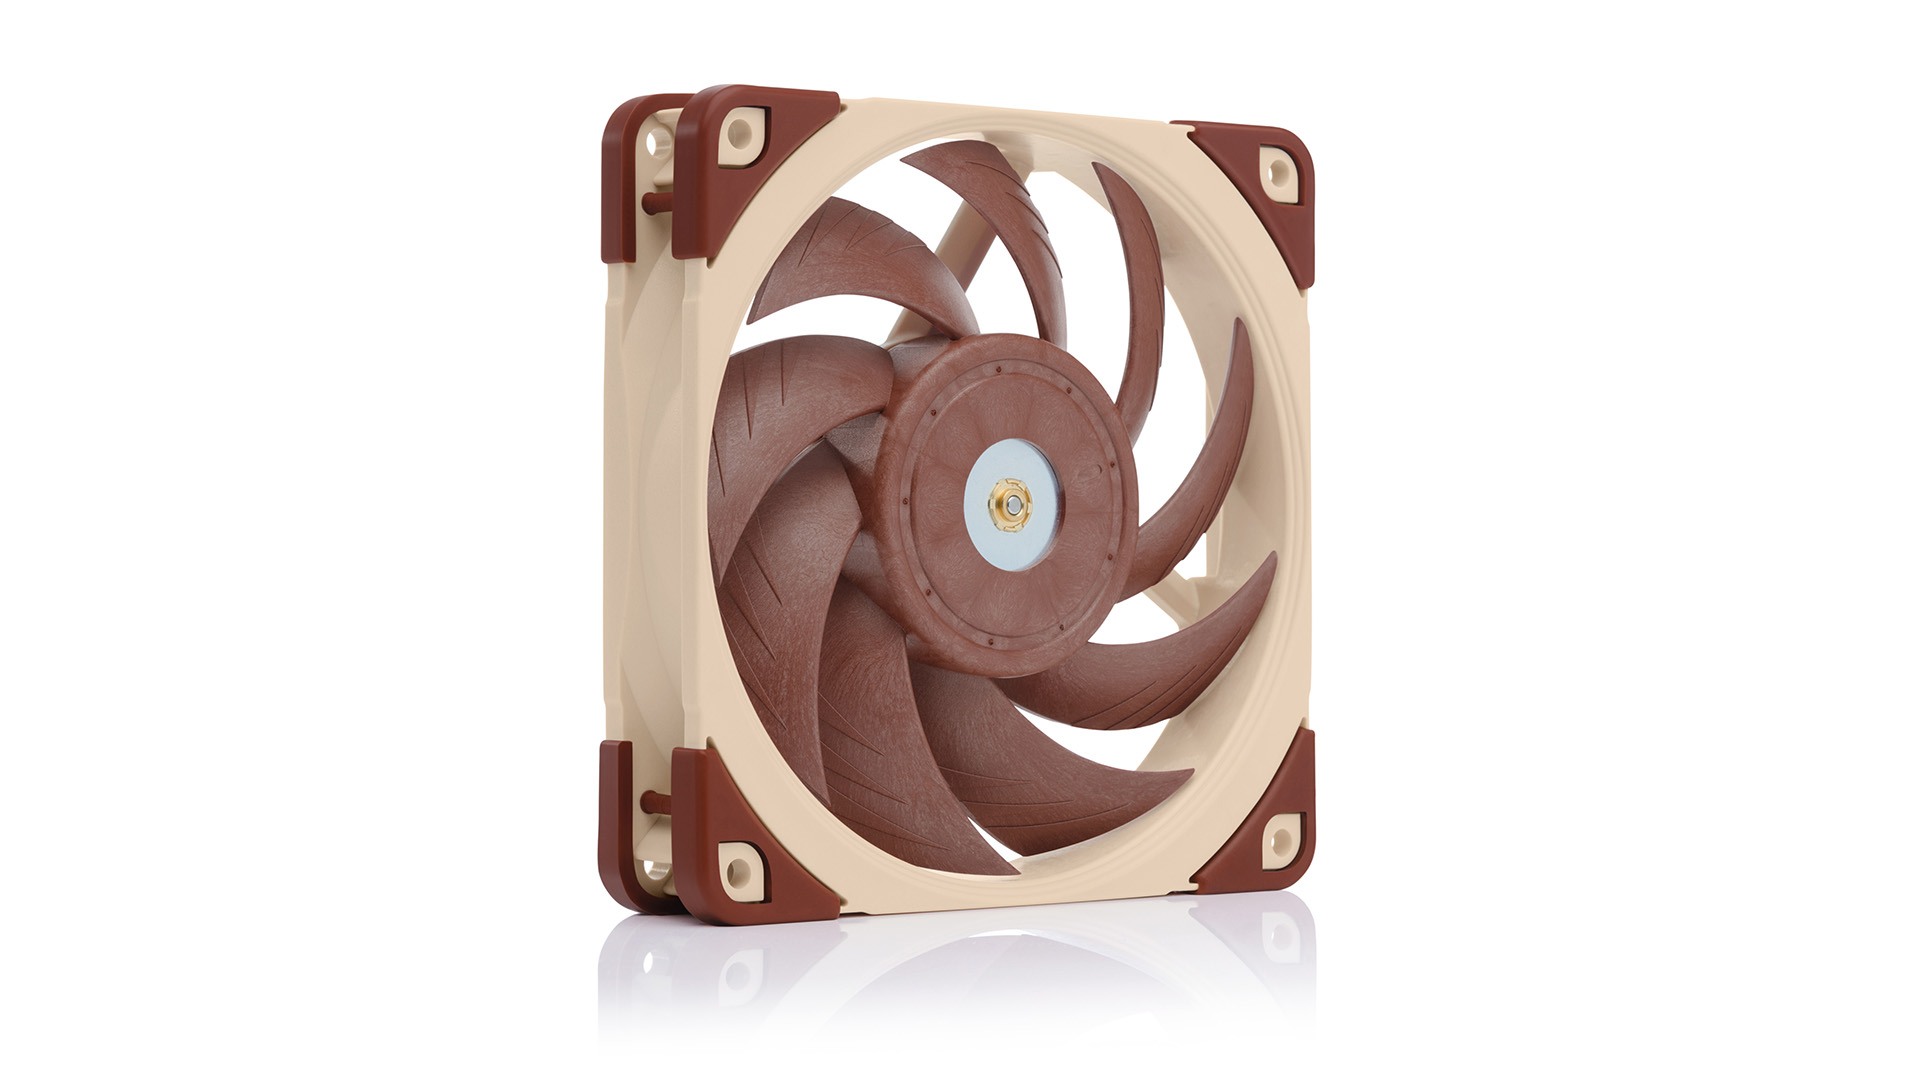 This is still the best PC case fan you can buy